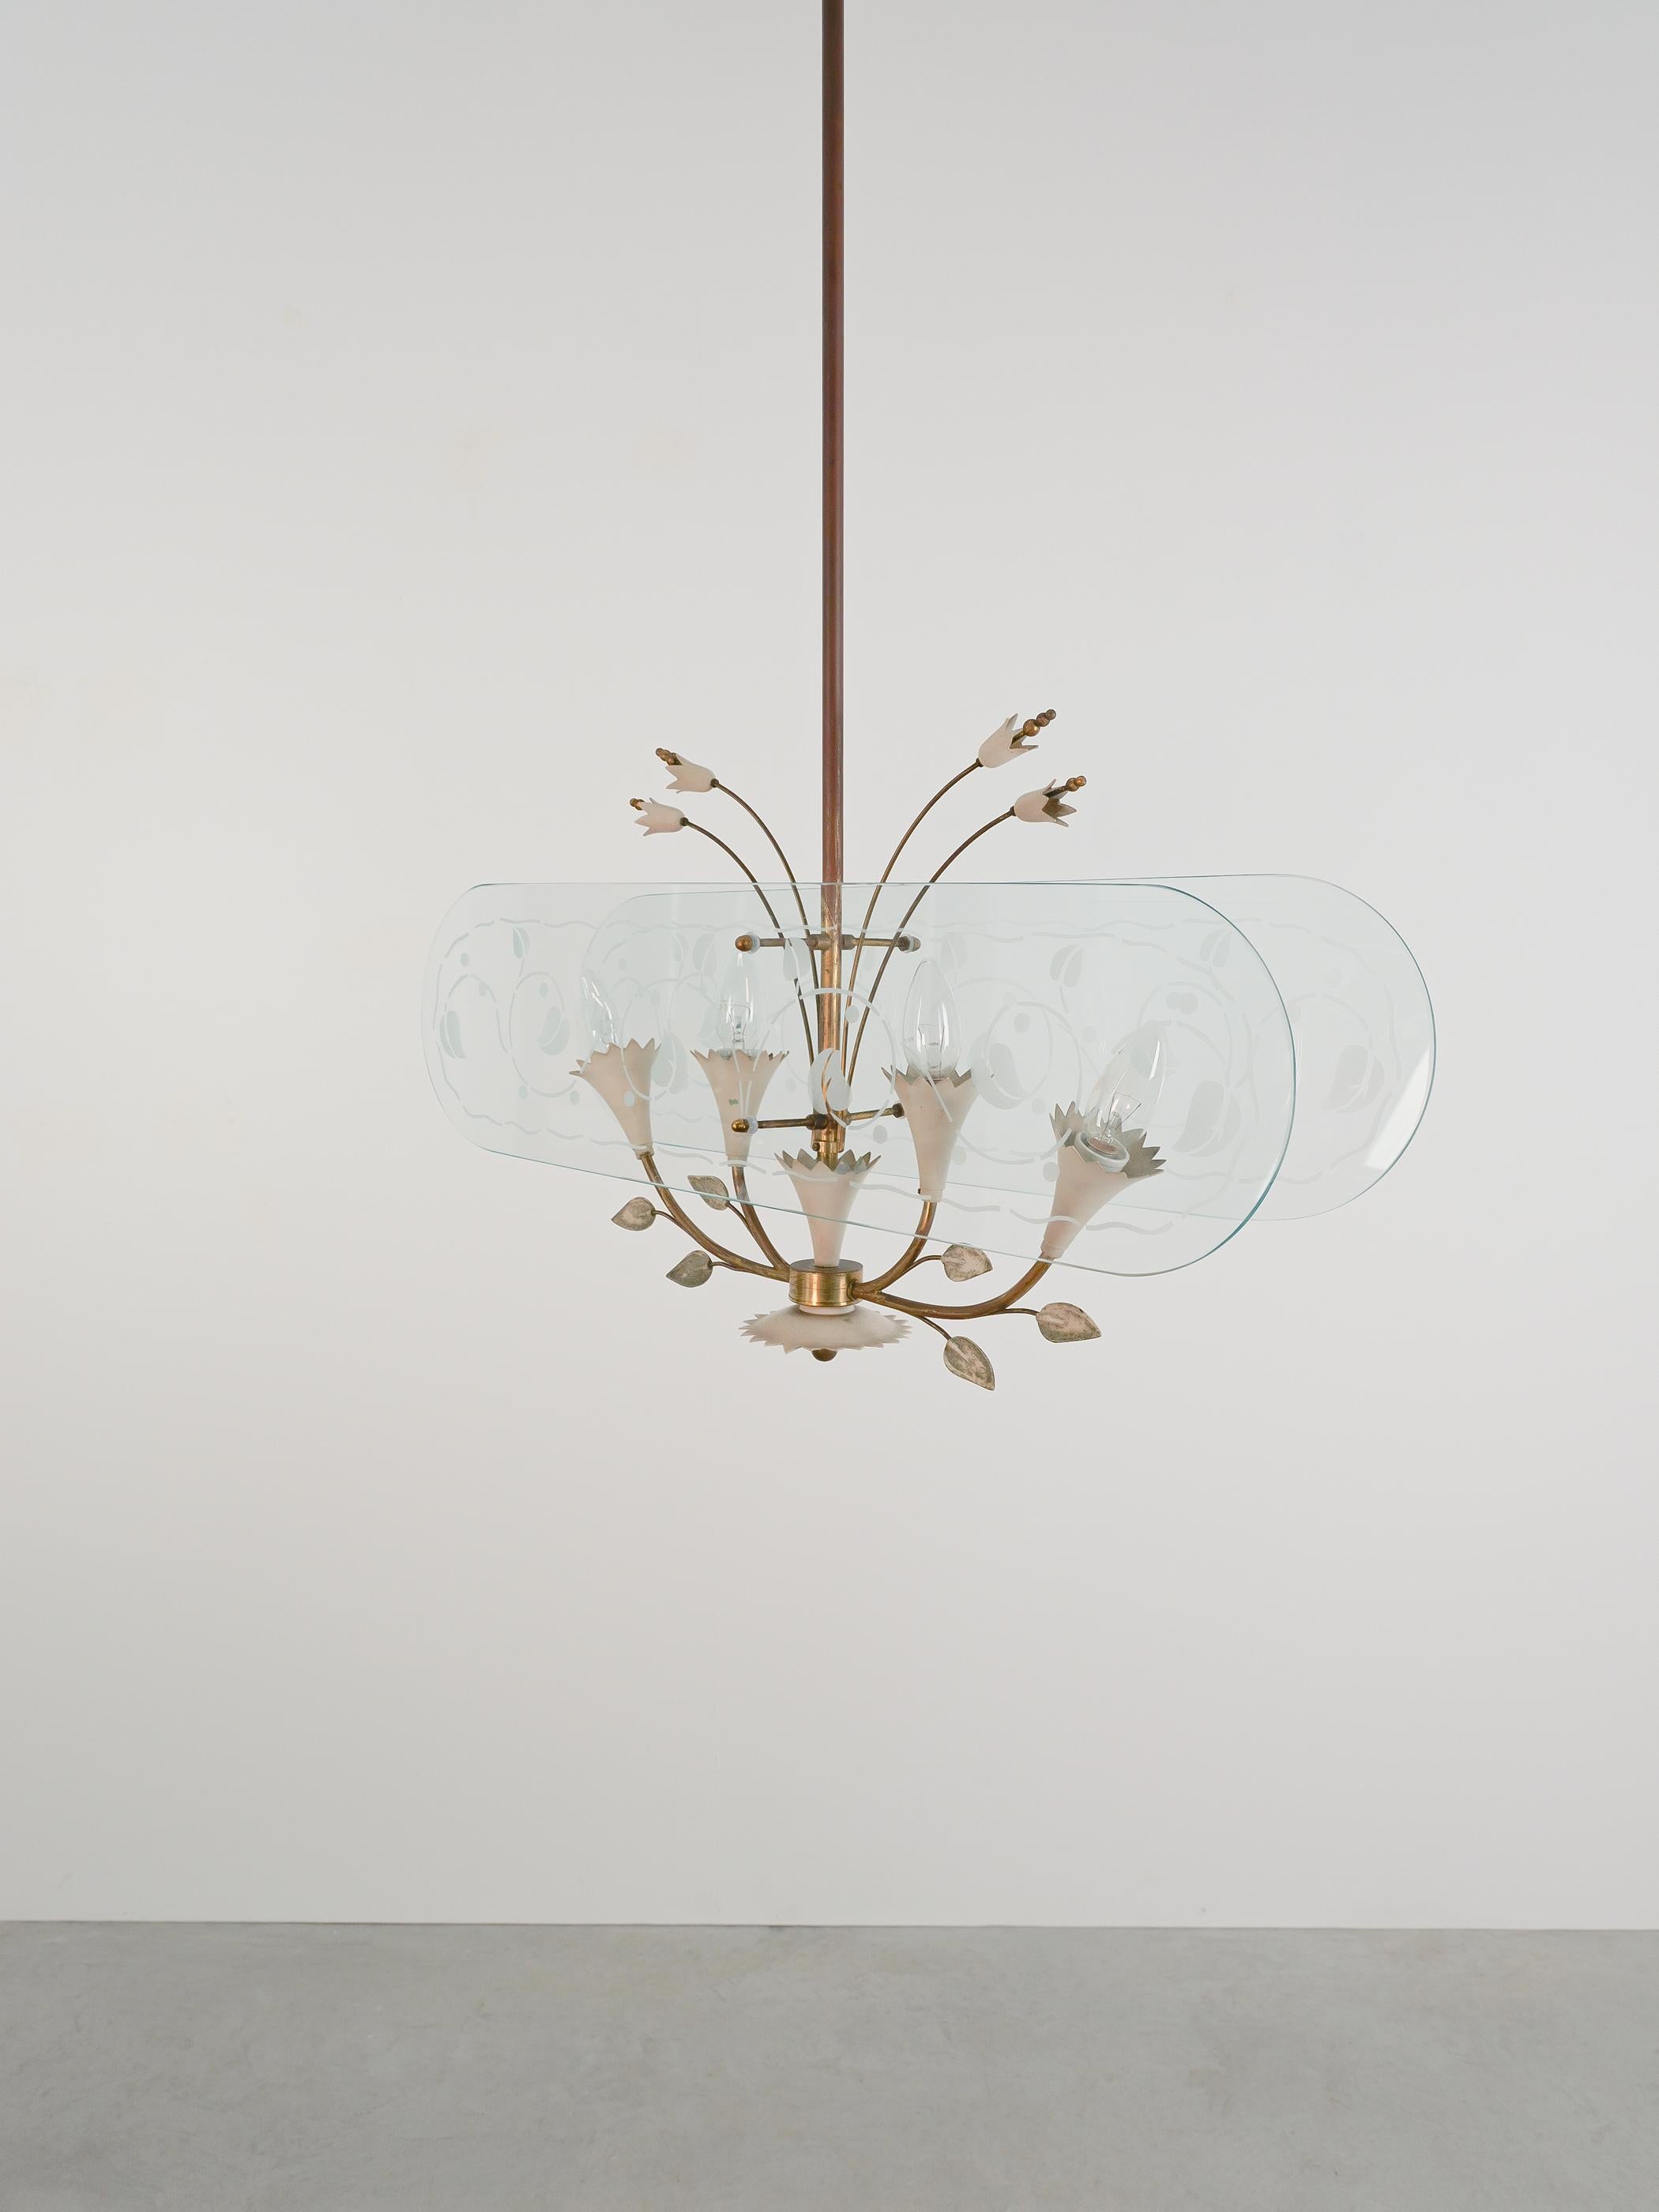 Brass Pietro Chiesa Chandelier Floral Glass with Etched Details Italy, 1950 For Sale